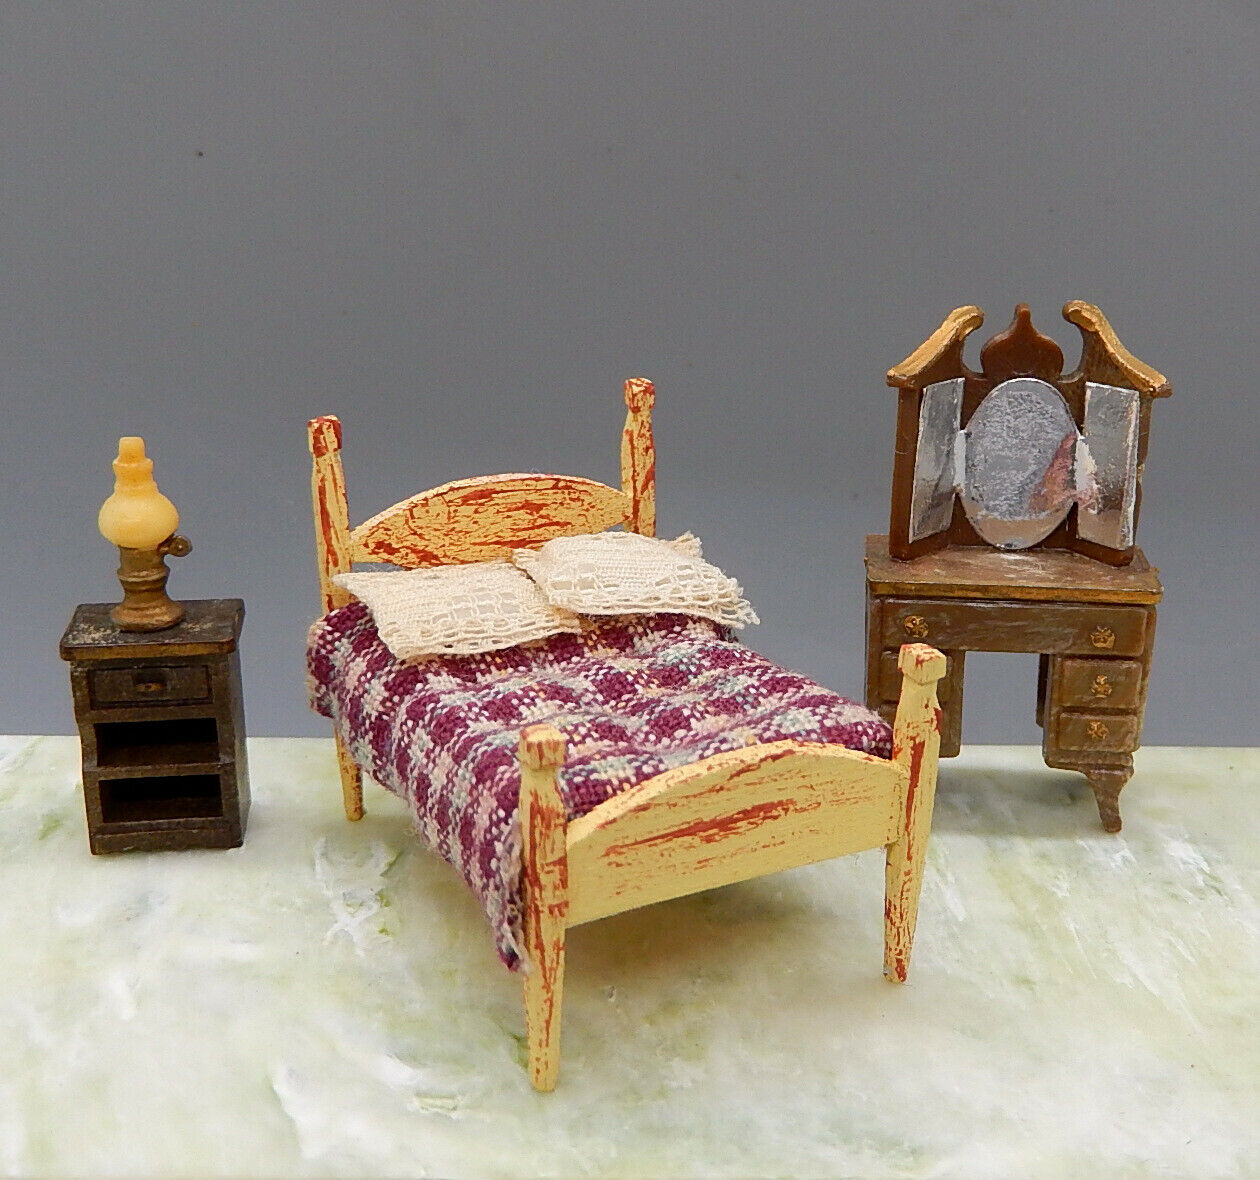 Vintage 1 4 Scale Bedroom Safety and trust Lot 1:48 Long-awaited Dollhouse Furniture Miniature